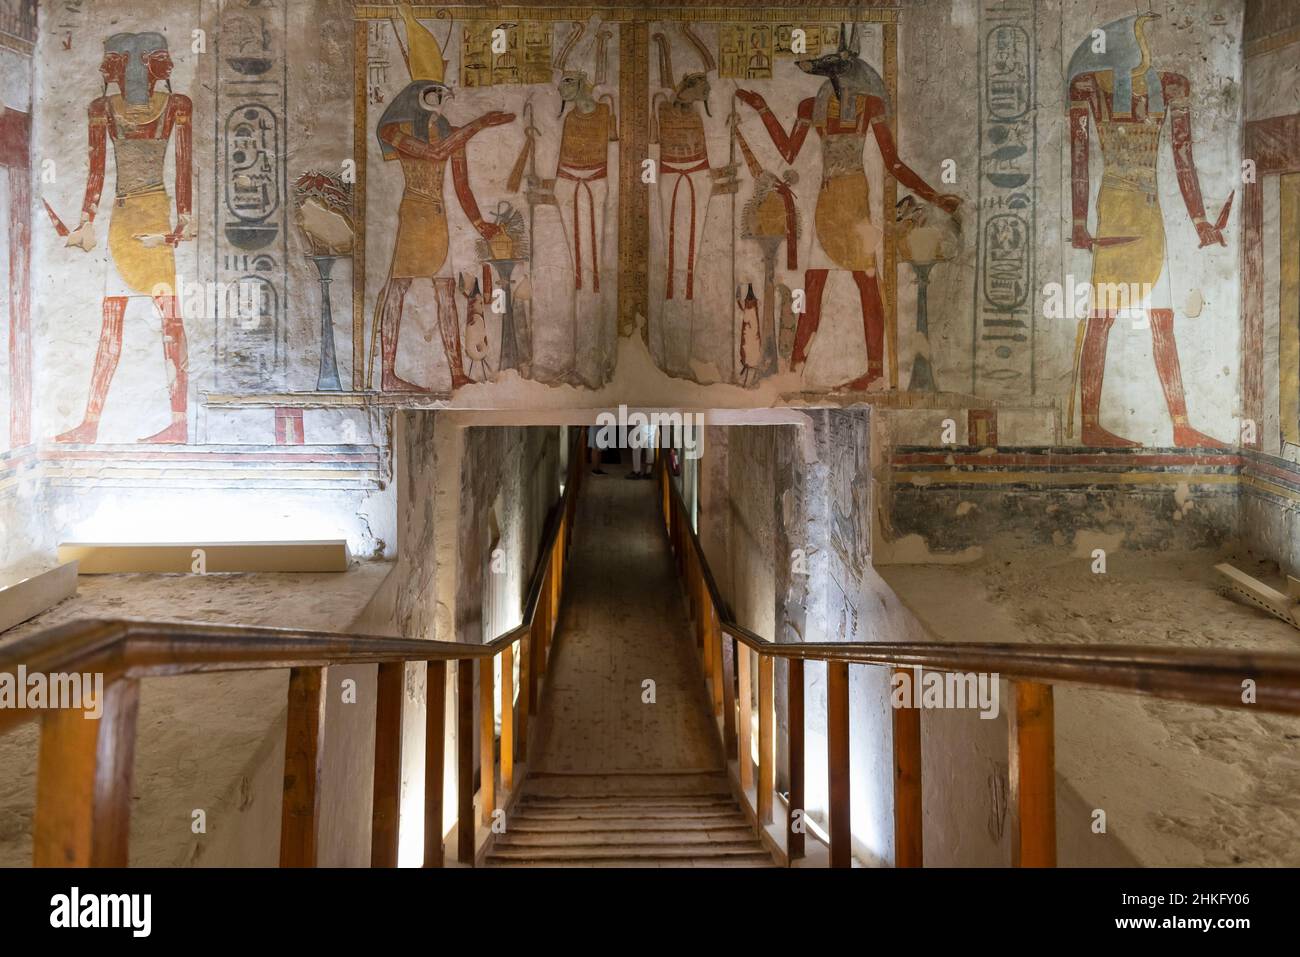 Egypt, Upper Egypt, Nile Valley, Luxor, Valley of the Kings, listed as World Heritage Site by UNESCO, colourful bas relief depicting Pharaoh on a wall of the tomb of Ramses III Stock Photo